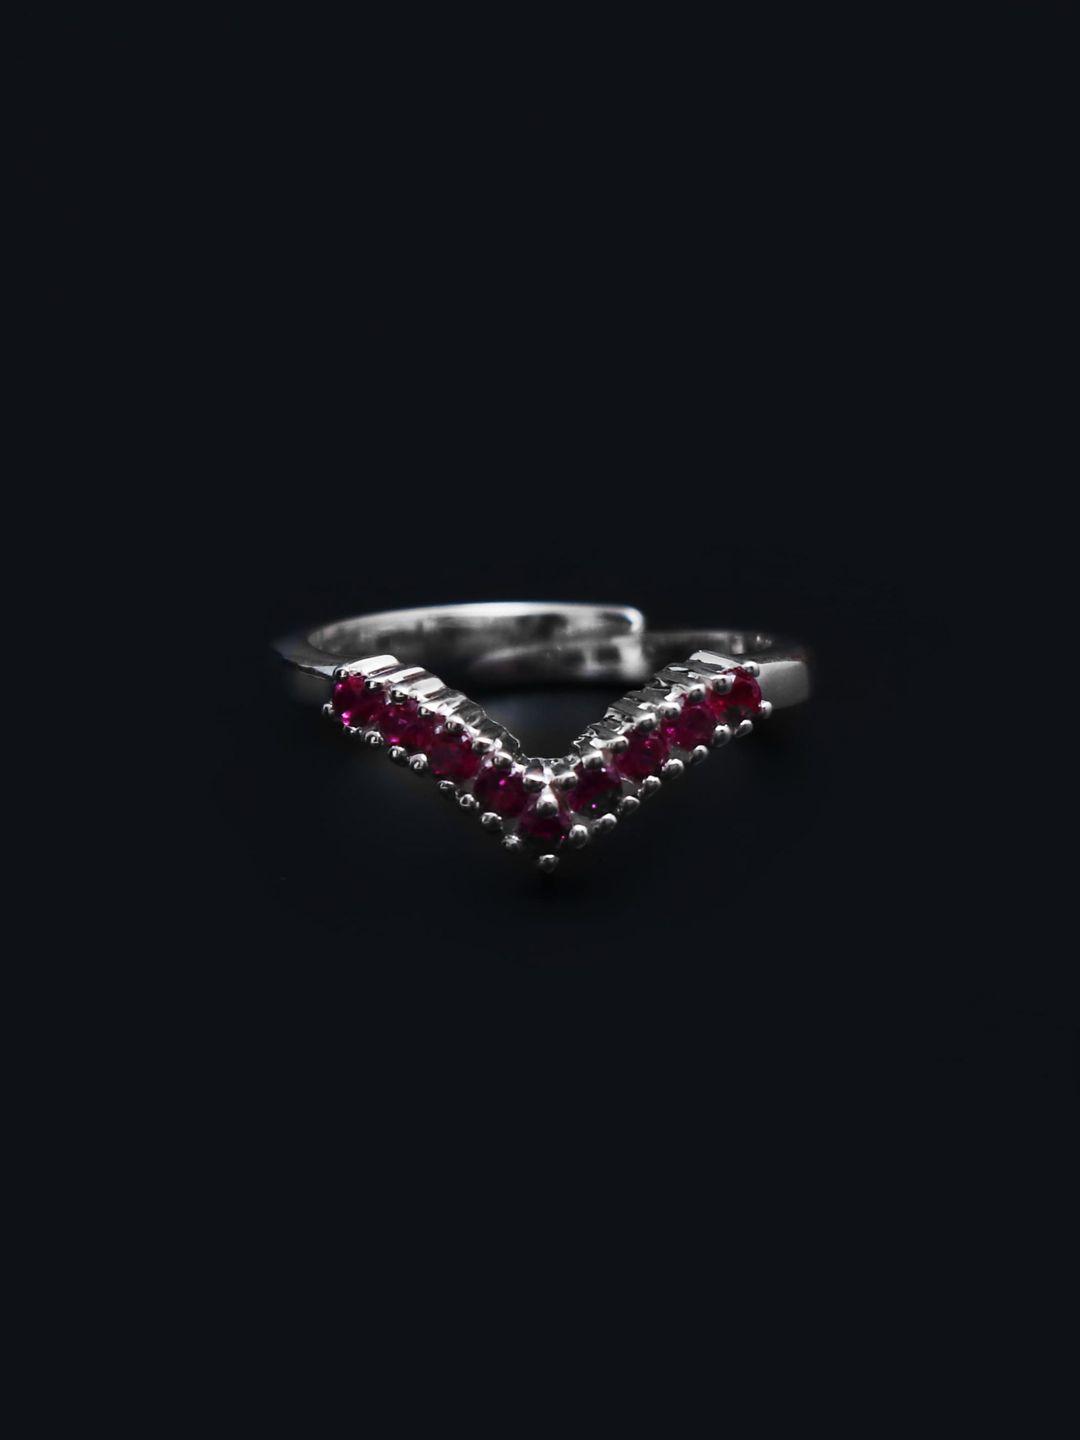 hiflyer rhodium-plated pink cz-studded adjustable finger ring